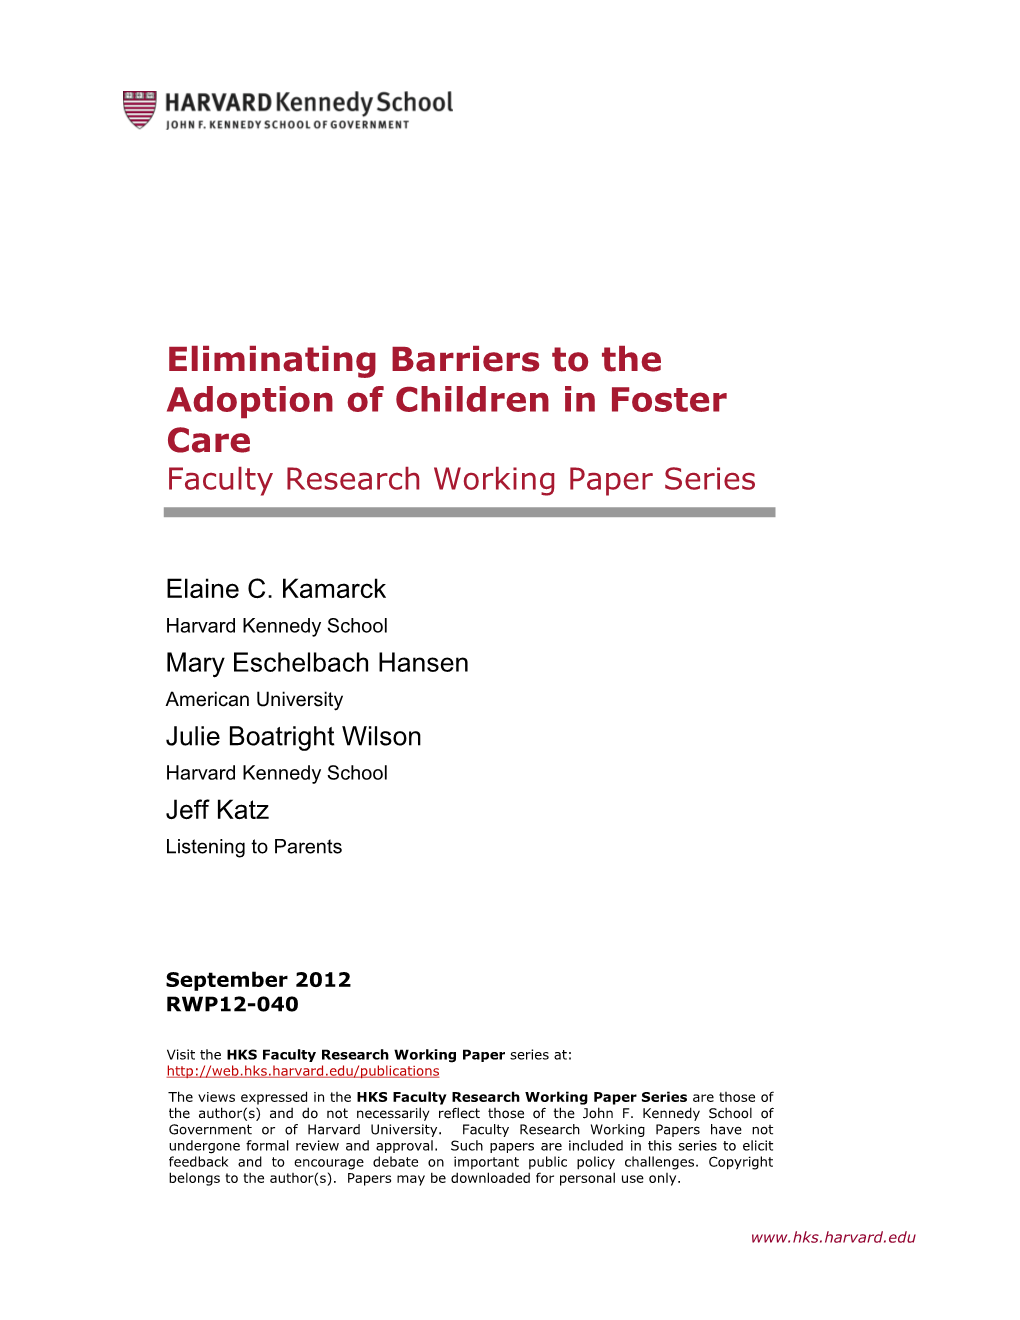 Eliminating Barriers to the Adoption of Children in Foster Care Faculty Research Working Paper Series